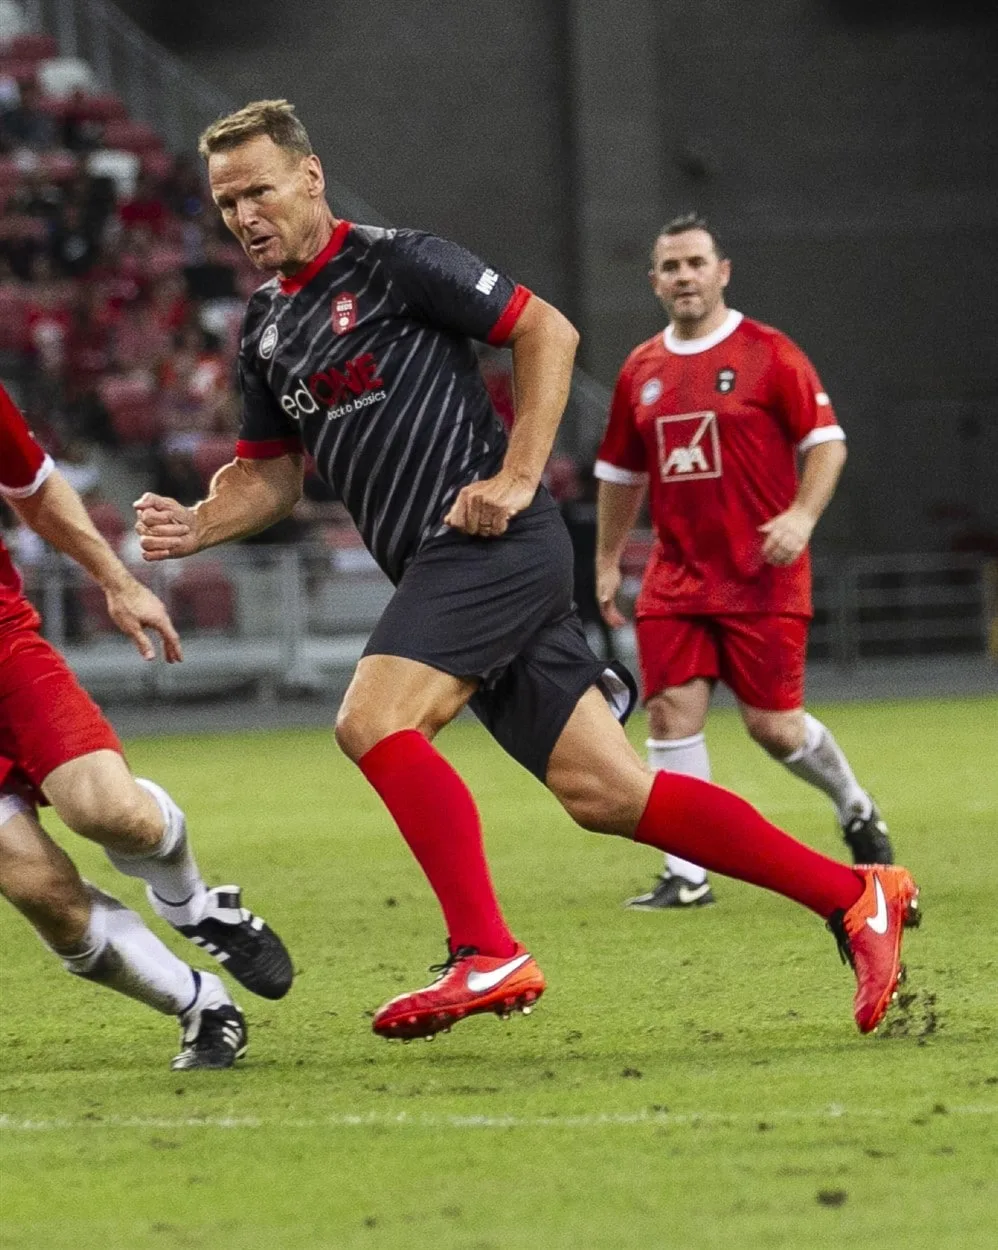 battle of the reds - liverpool manchester united singapore legends sheringham